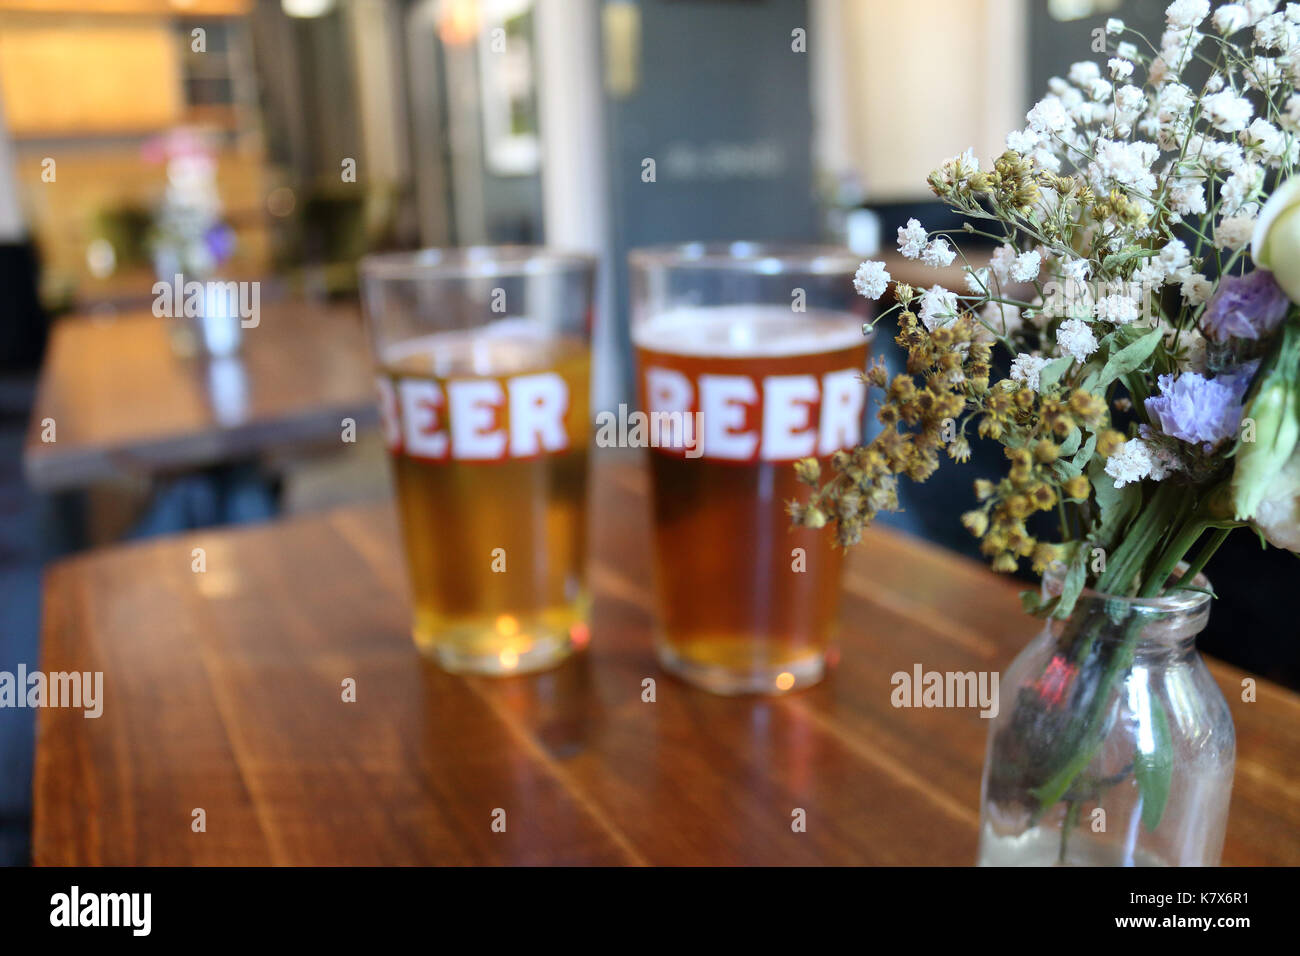 Two pints in 'BEER' glasses in a pub. Shallow focus on flower vase. London, UK. Stock Photo